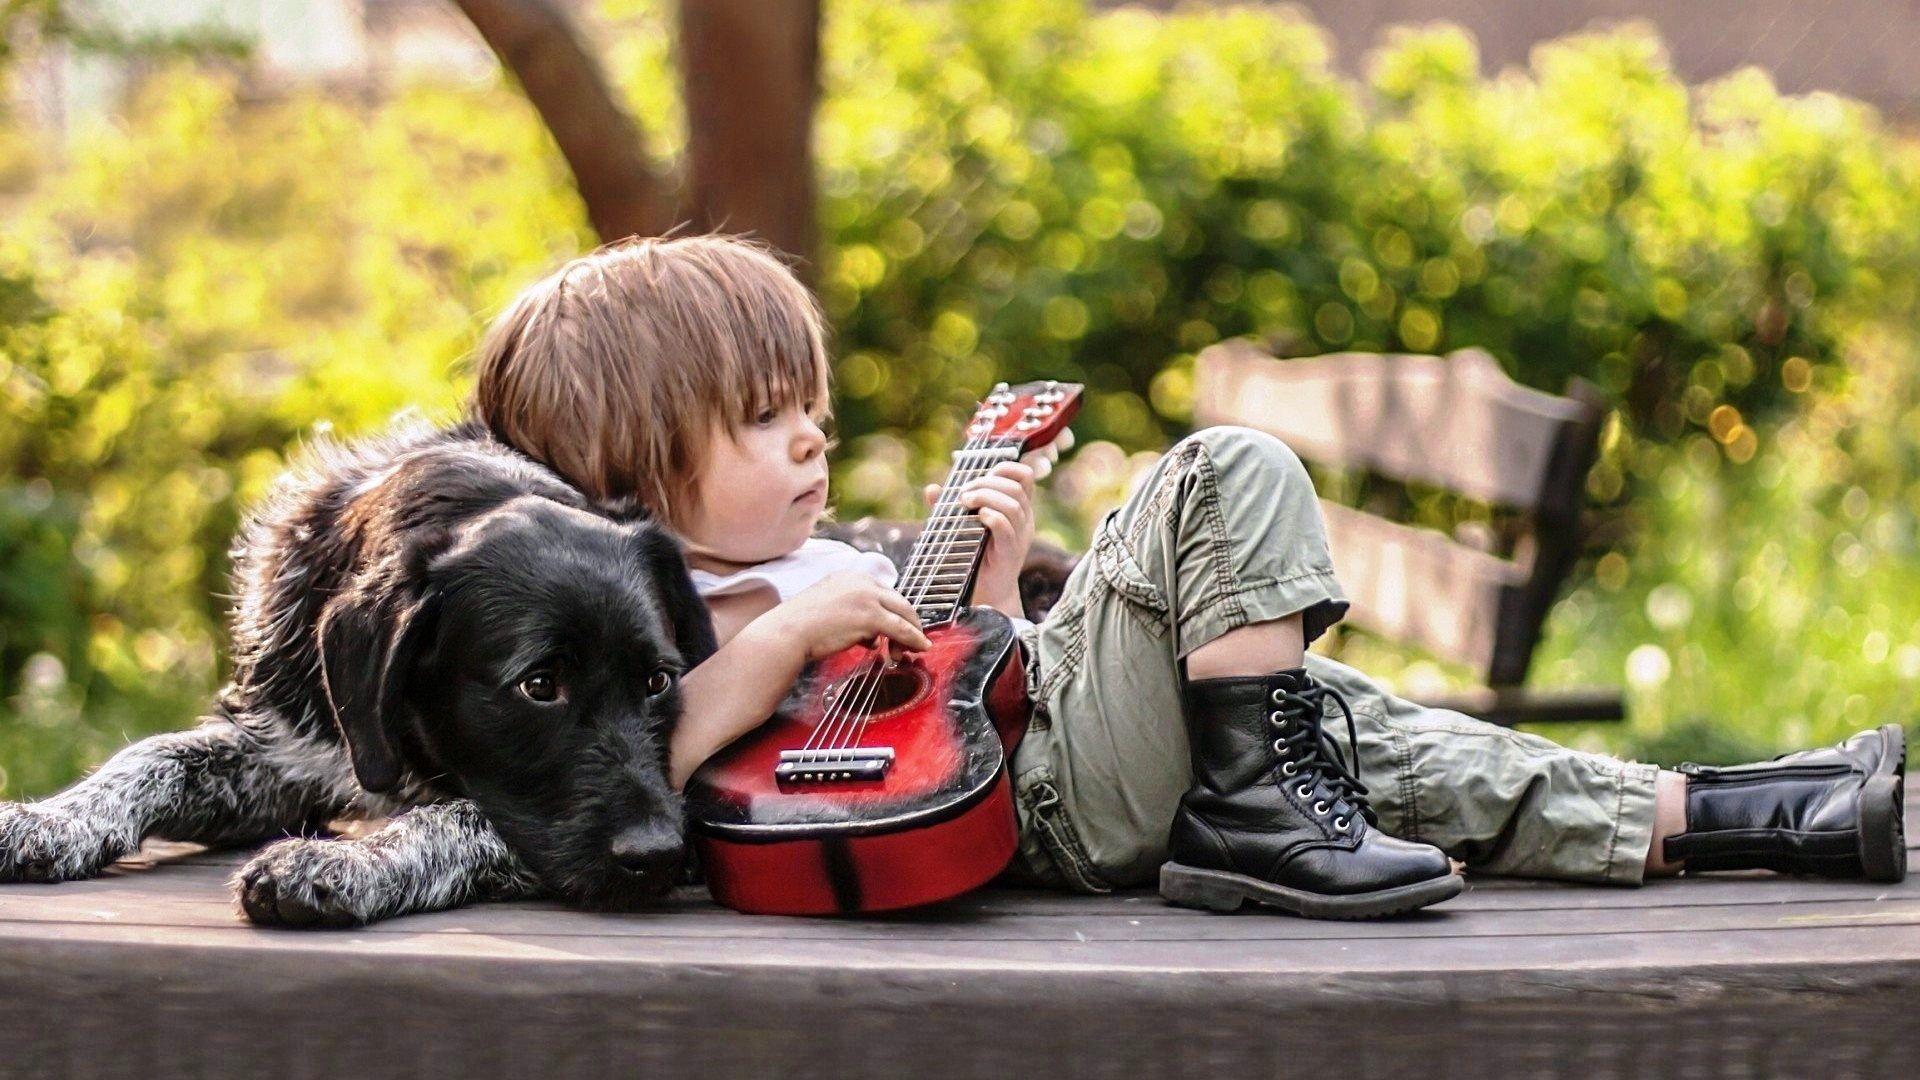 Boy With Guitar  Wallpapers  Wallpaper  Cave